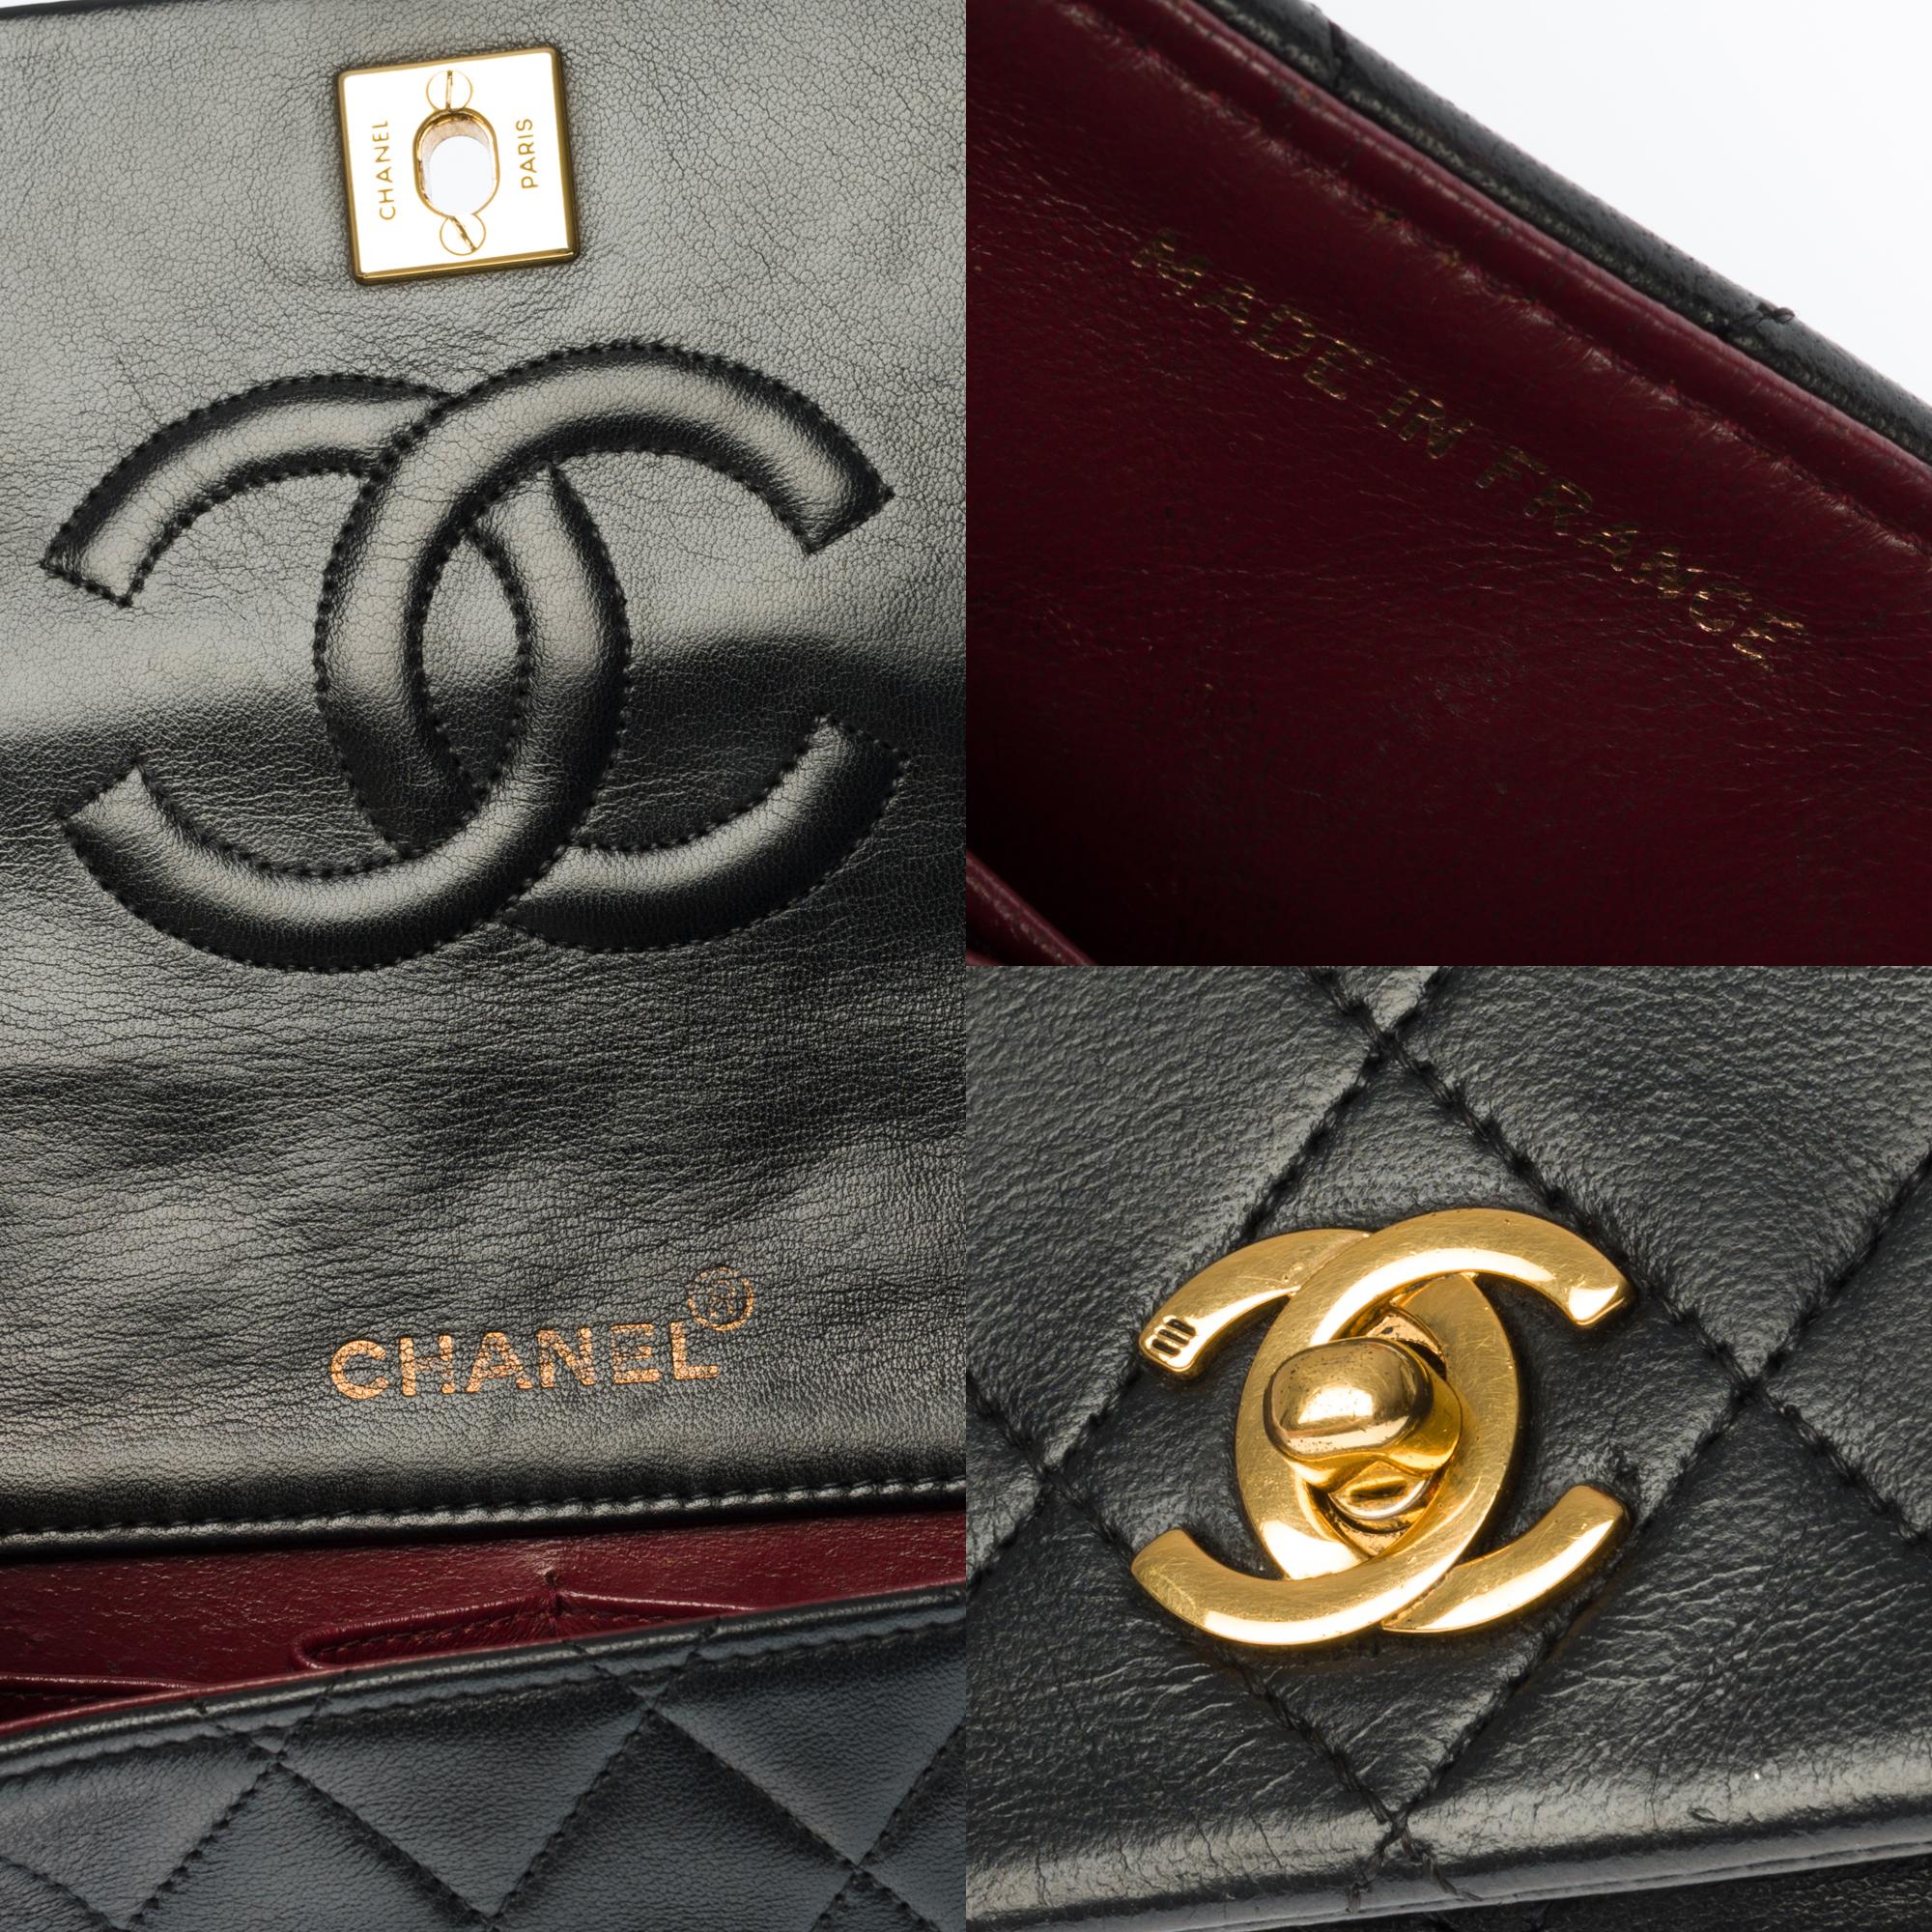 Women's Chanel Classic Mini Full Flap shoulder bag in black quilted leather and GHW